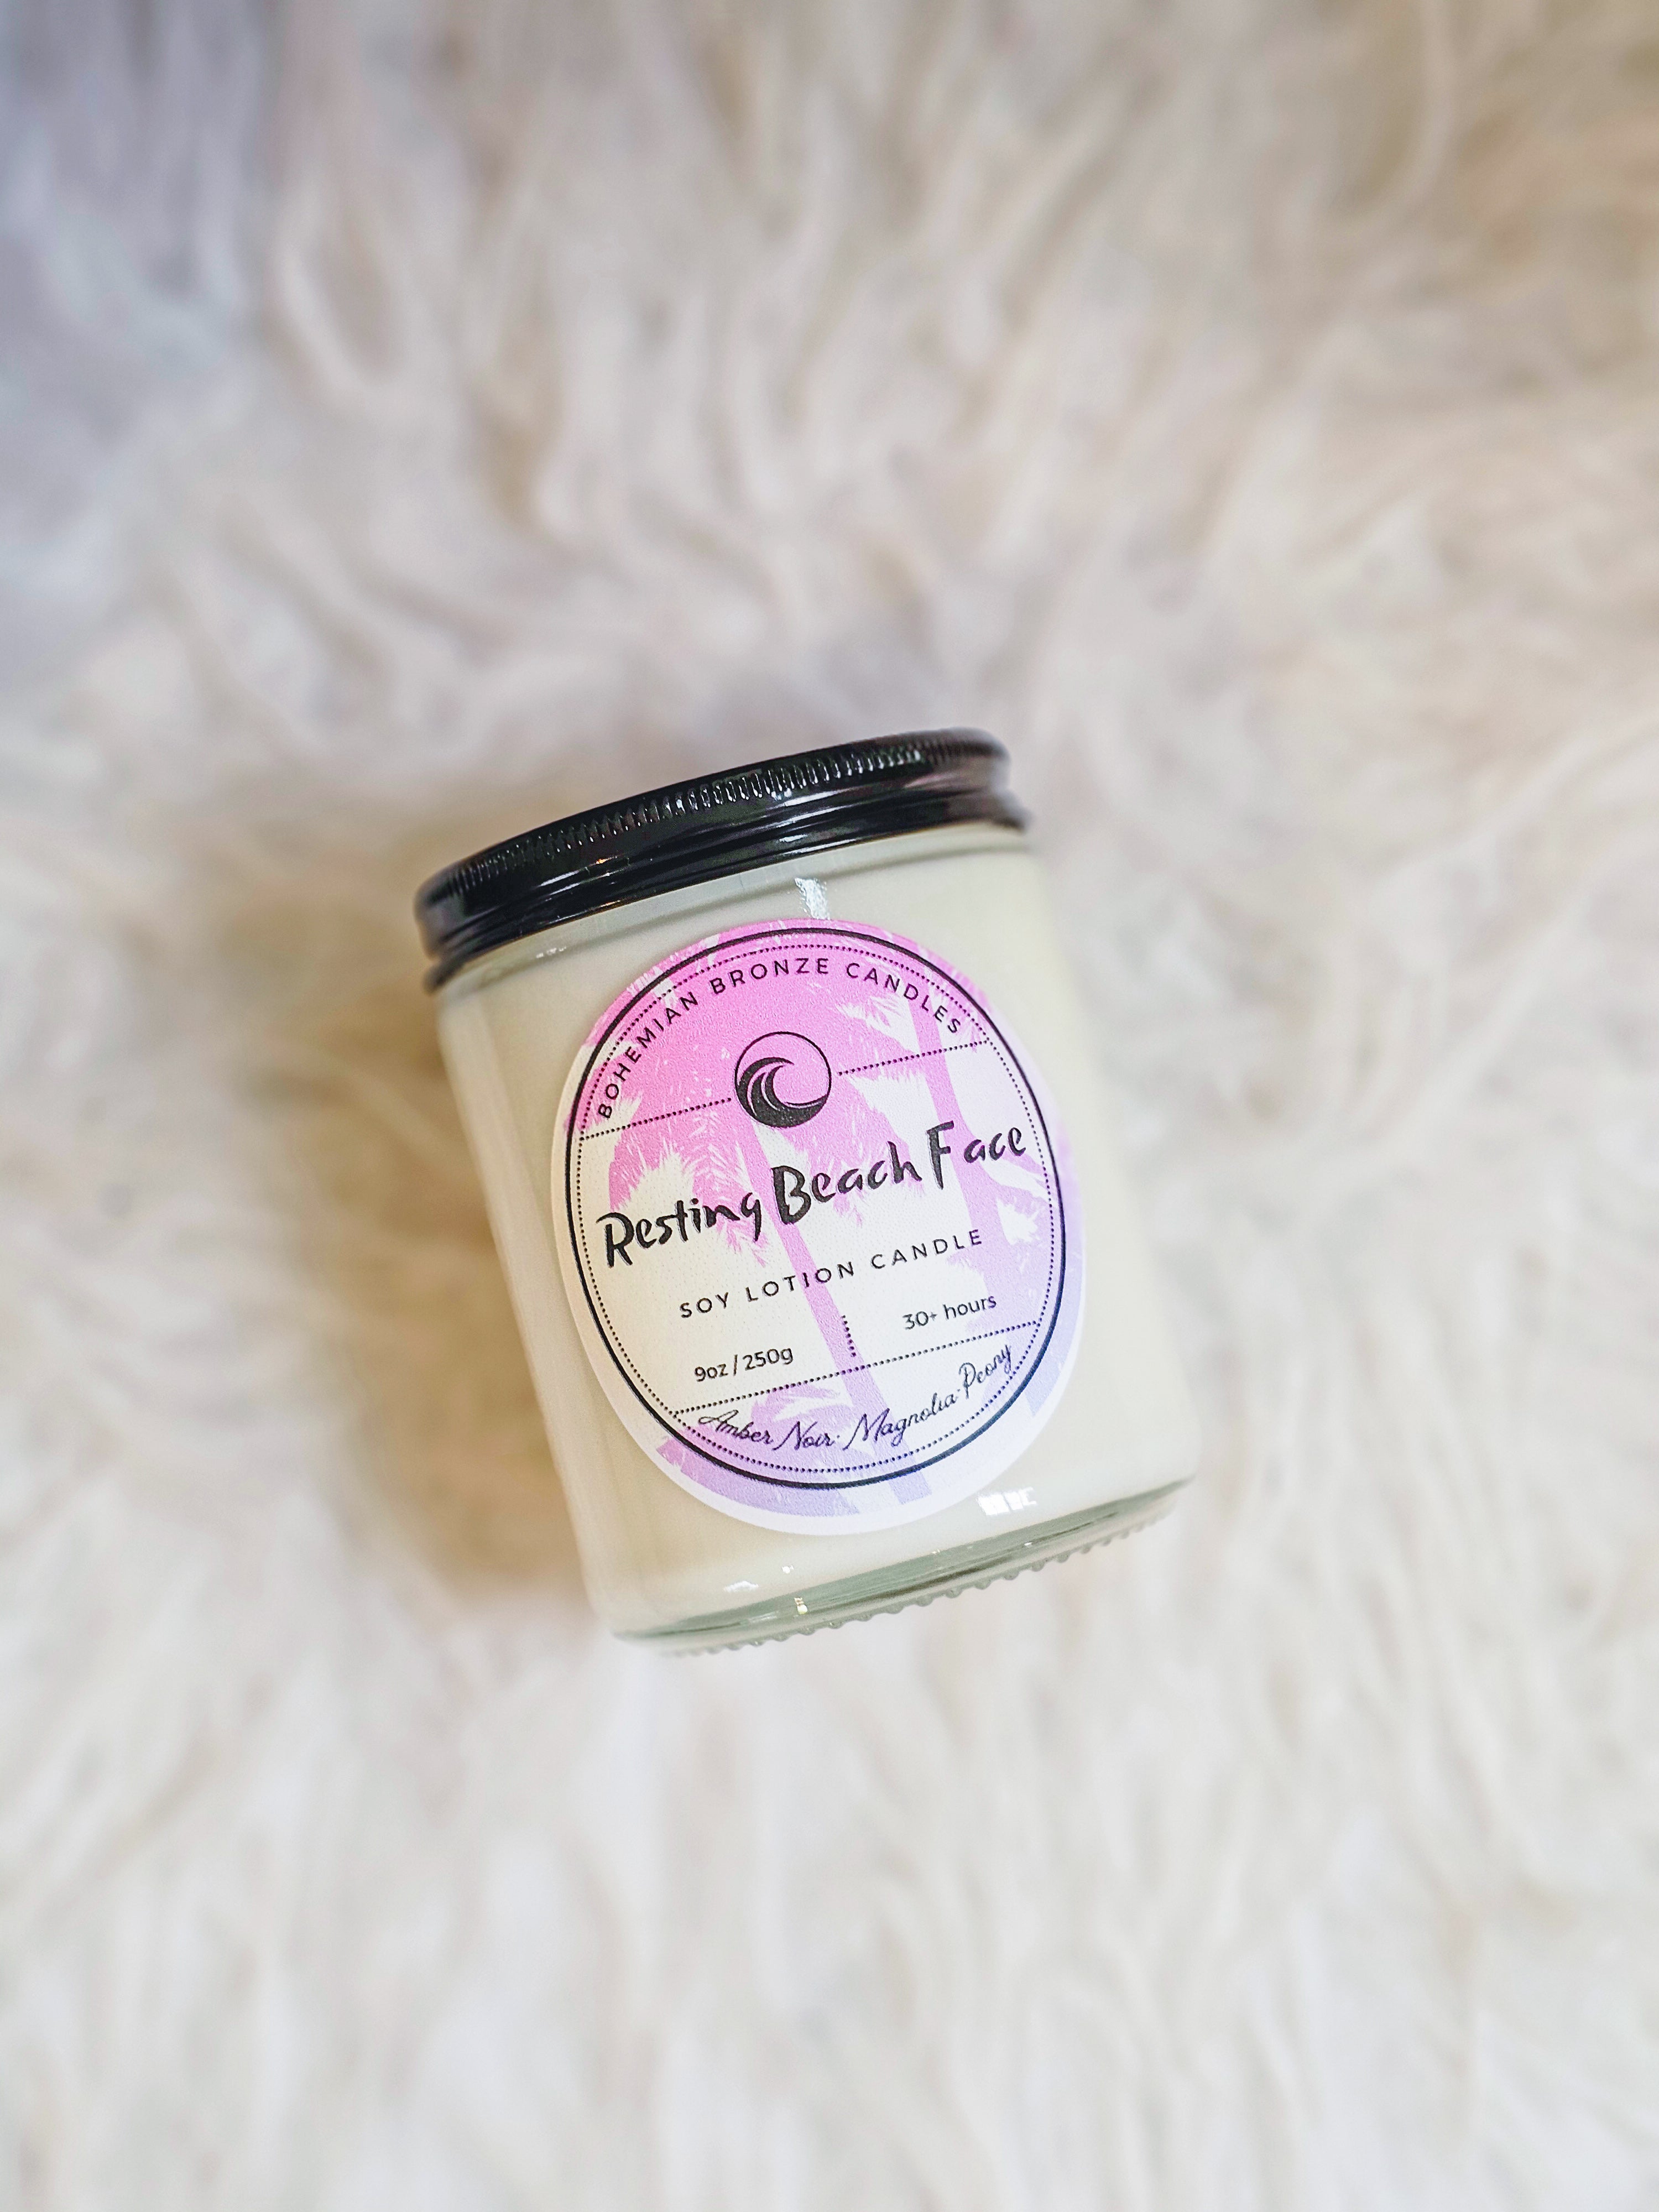 Bohemian Bronze Co. Resting Beach Face Soy Lotion Candle 9oz